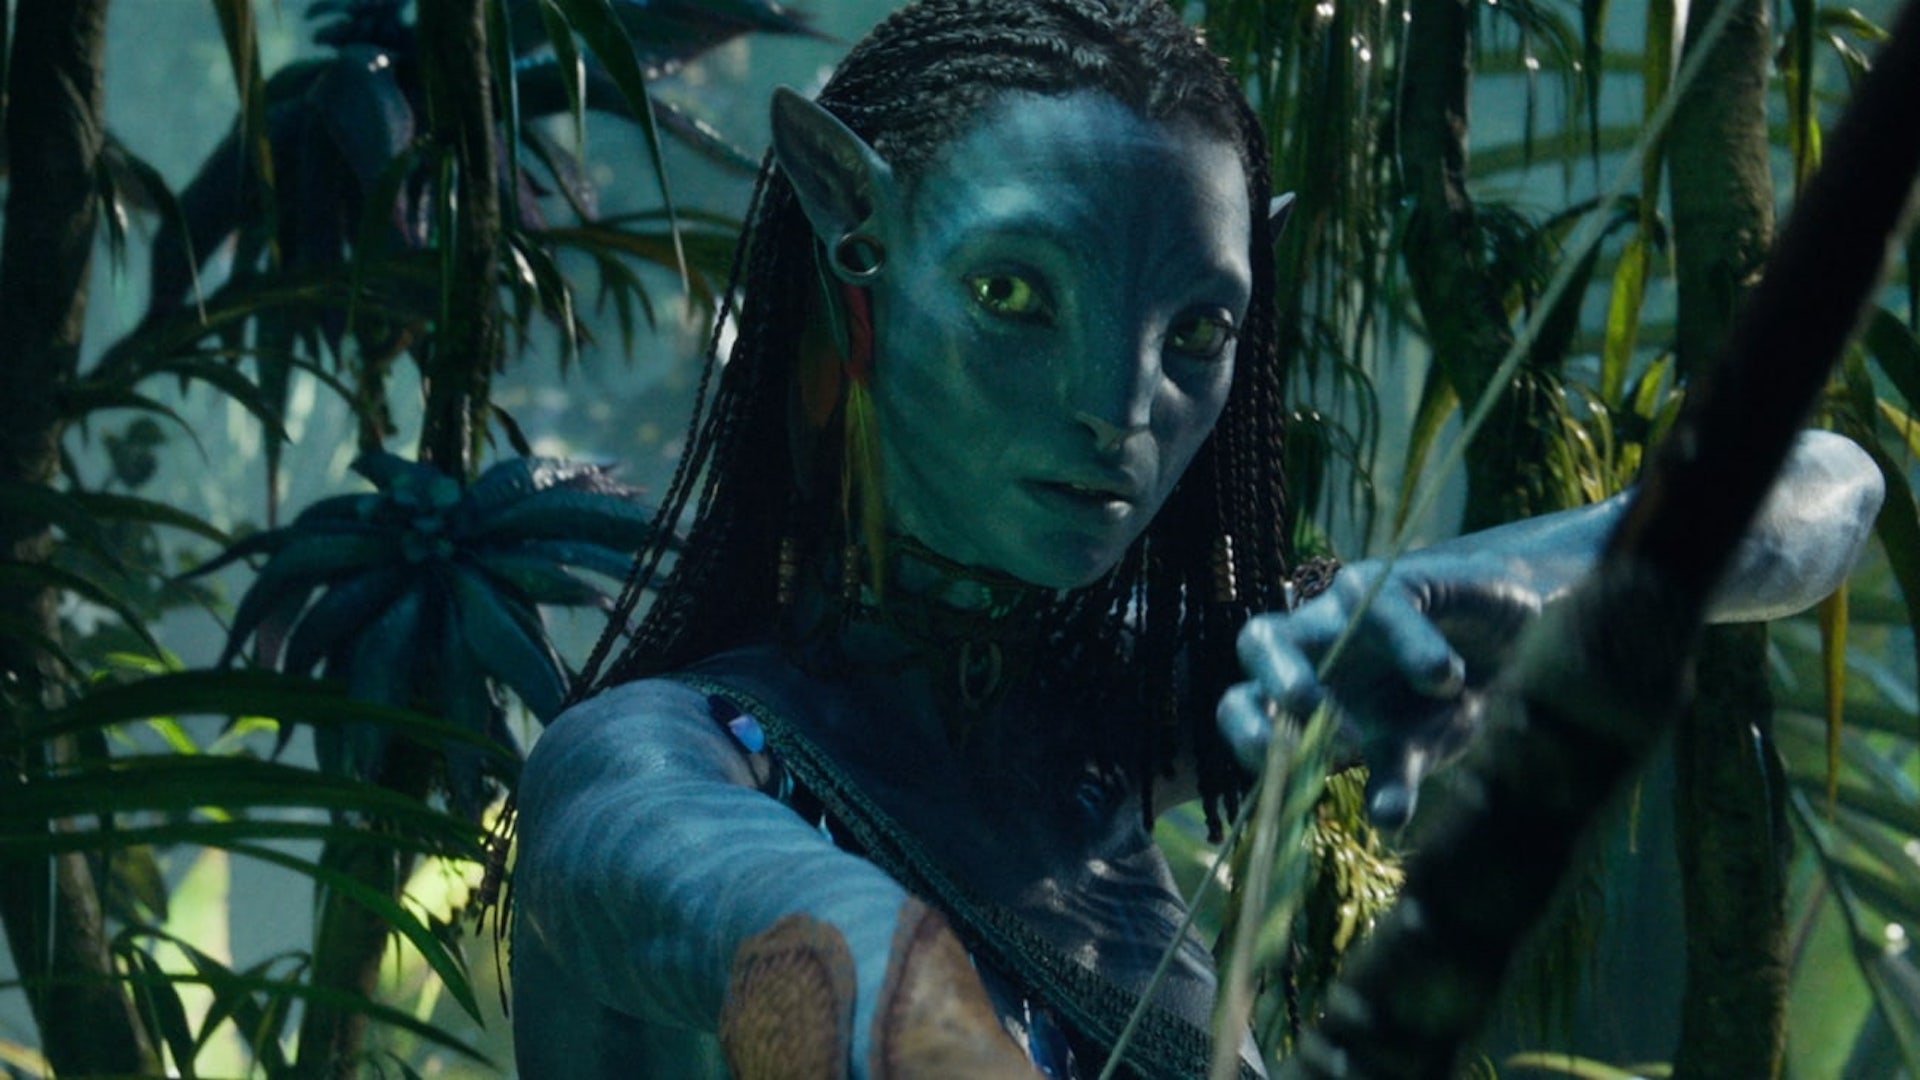 20th Century Studios' 'Avatar: The Way of Water' is quickly approaching. The new trailer and poster for the upcoming film have been released.